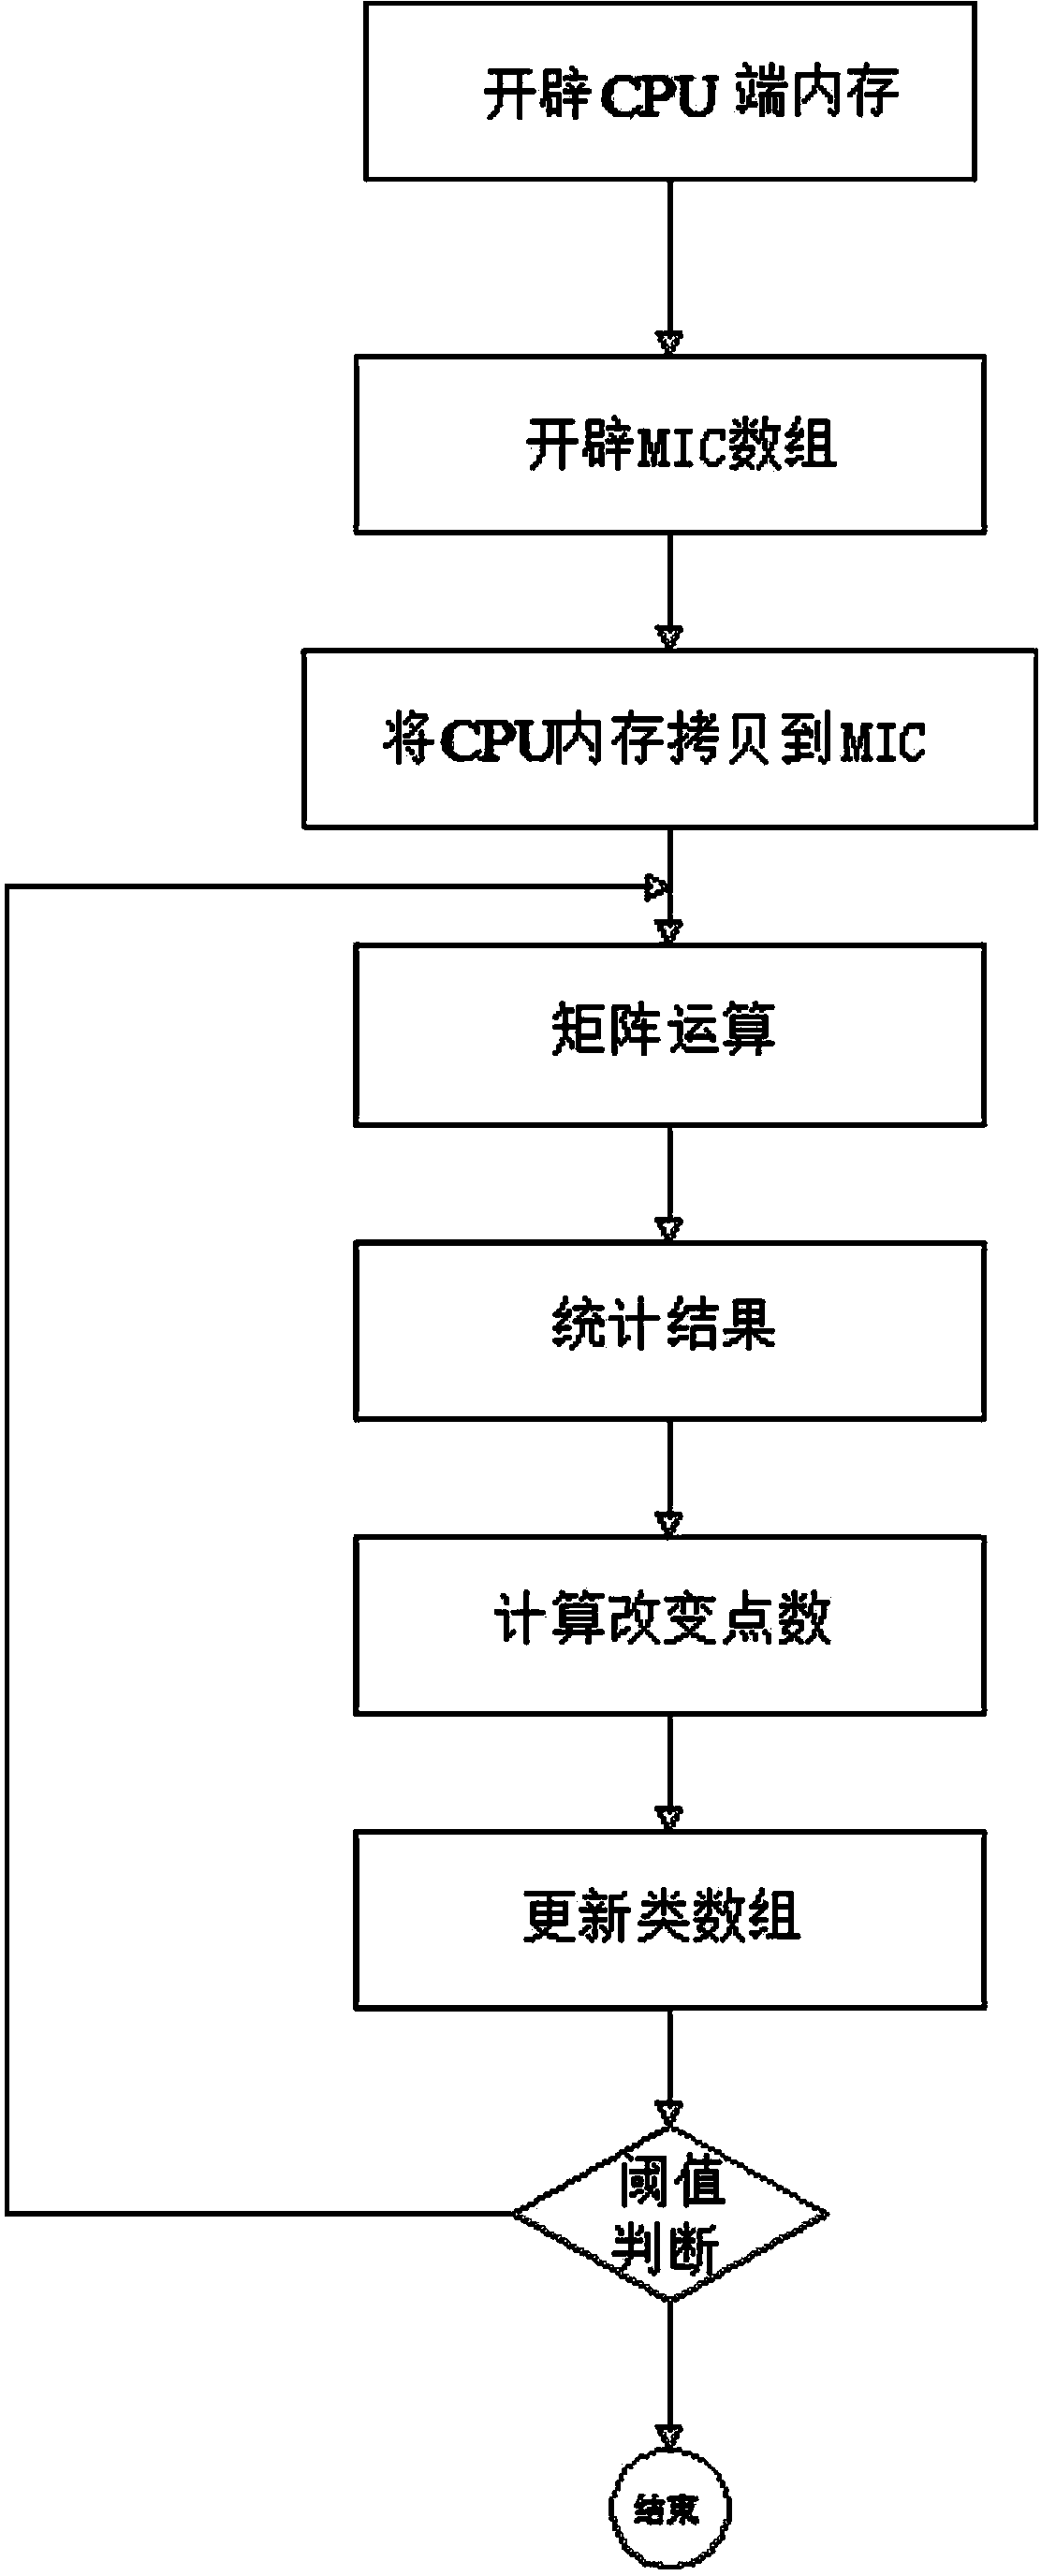 Method and device for implementing clustering algorithm based on MIC